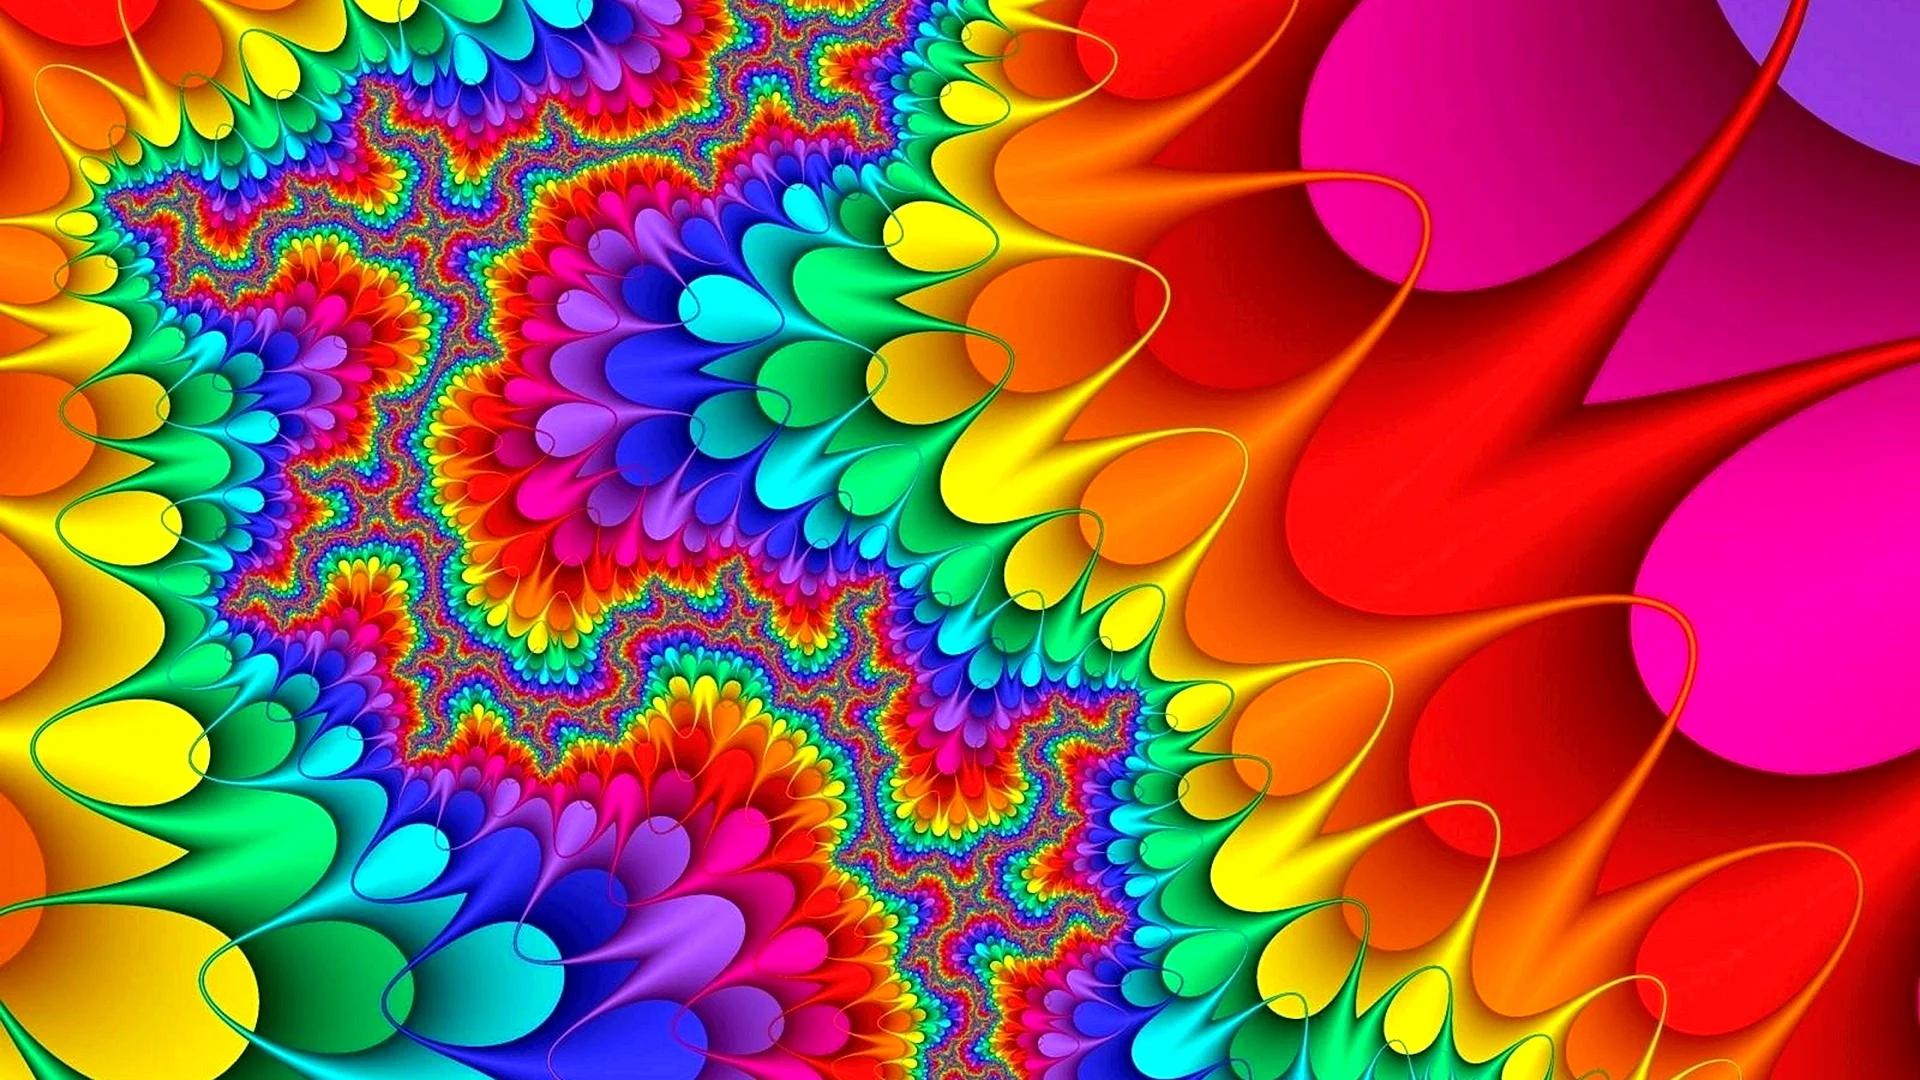 Colorful Pictures Wallpaper